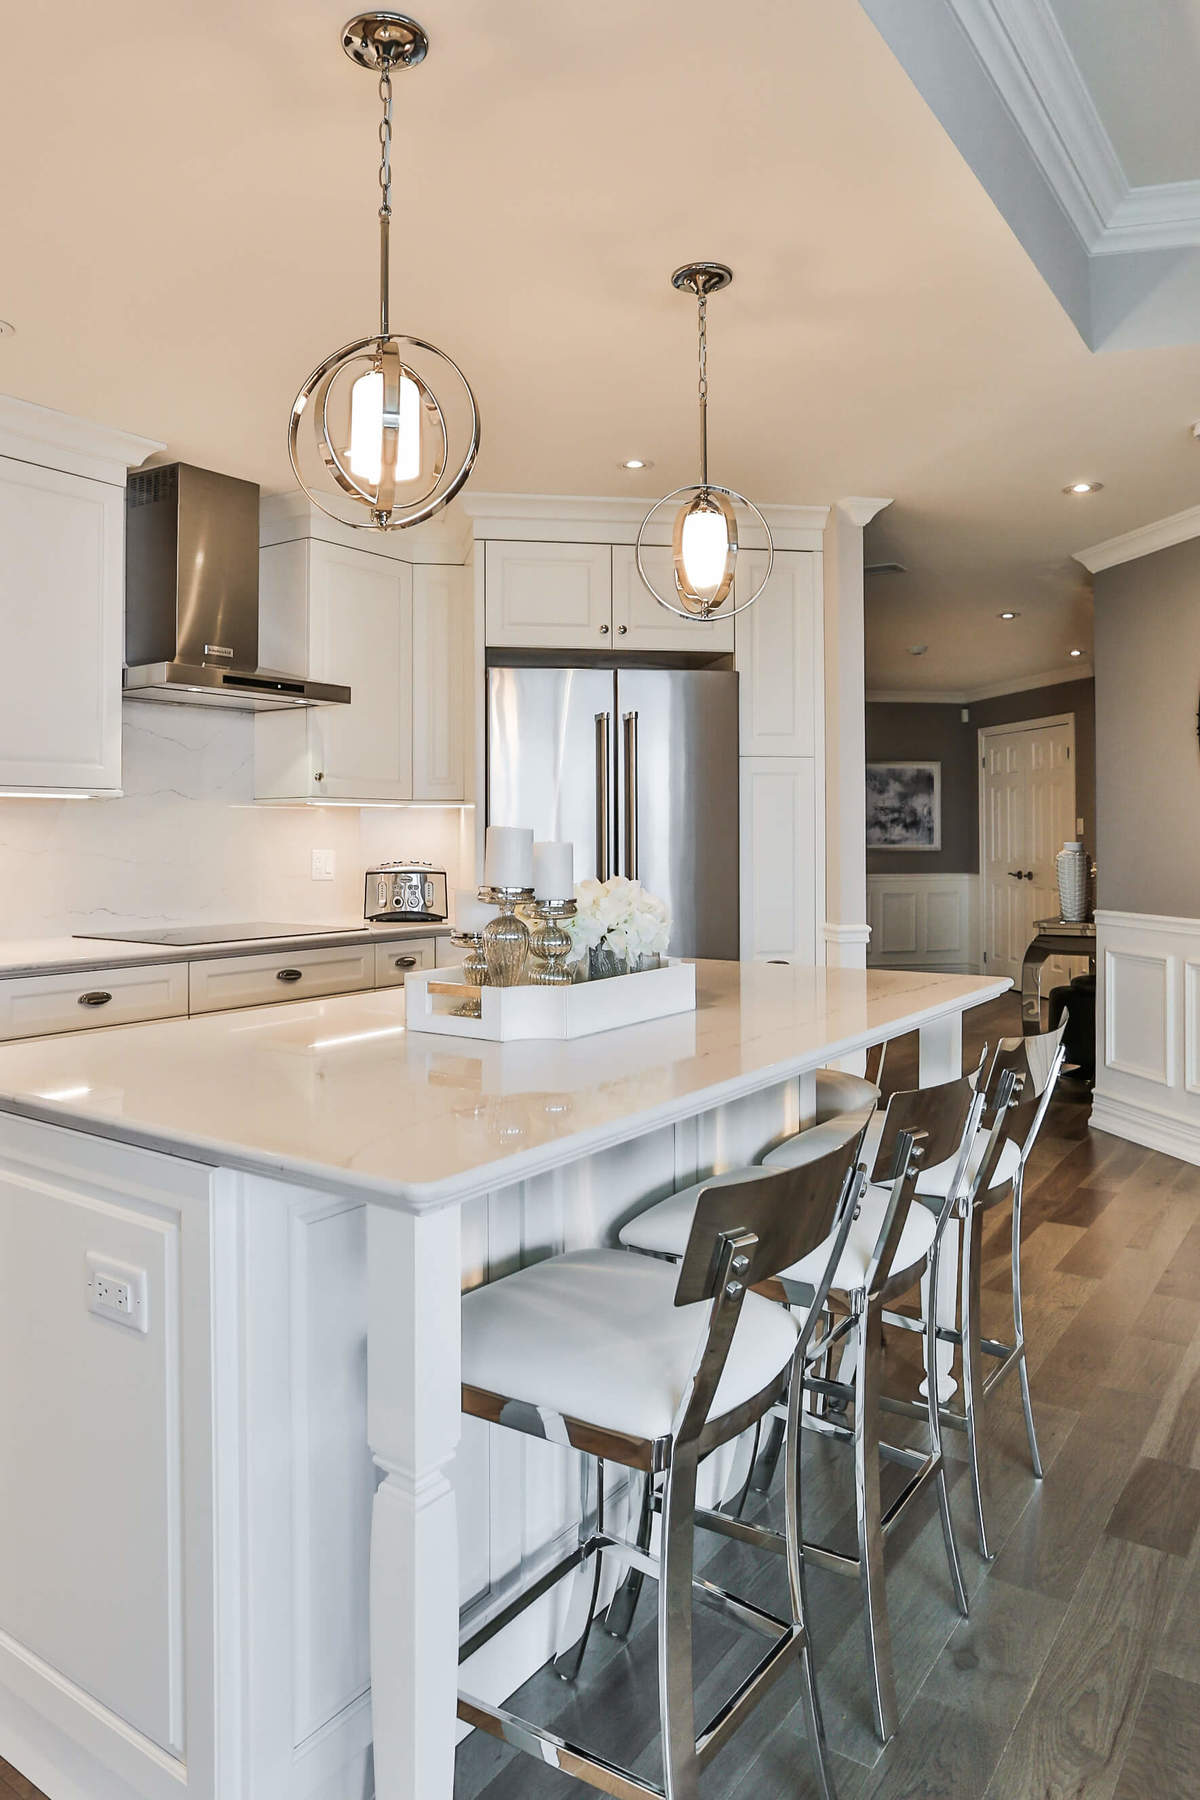 White kitchen design with white cupboards, stainless steel appliances, hardwood floors, and a large island.